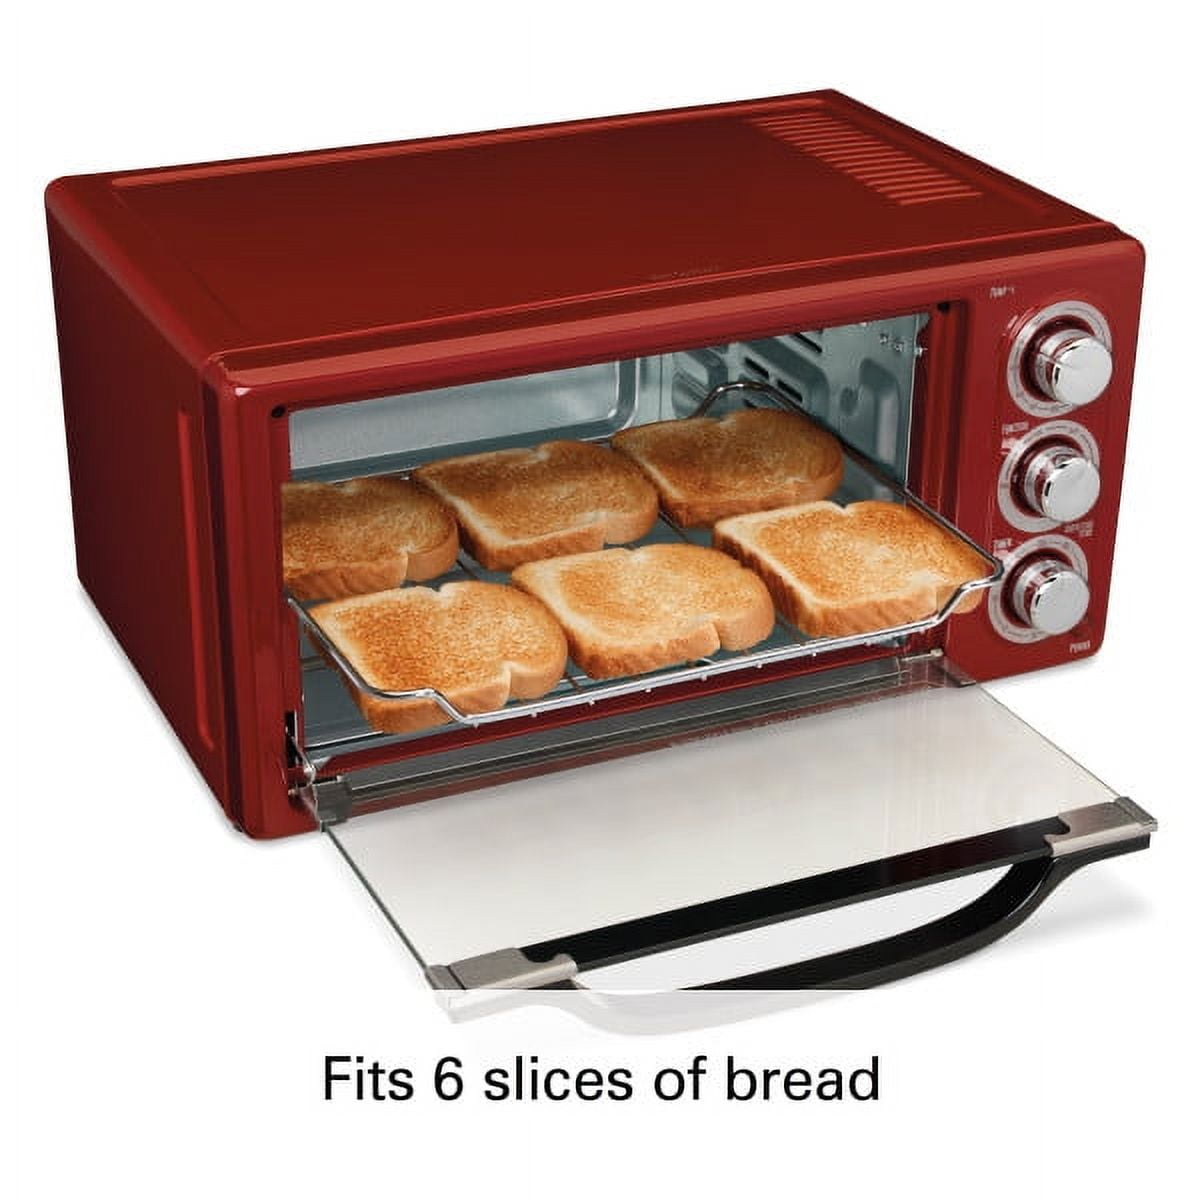  Hamilton Beach Toaster Oven Air Fryer Combo, Includes Bake,  Broil, and Toast, Fits 12” Pizza, 1800 Watts, 6 Cooking Modes, Stainless  Steel : Home & Kitchen